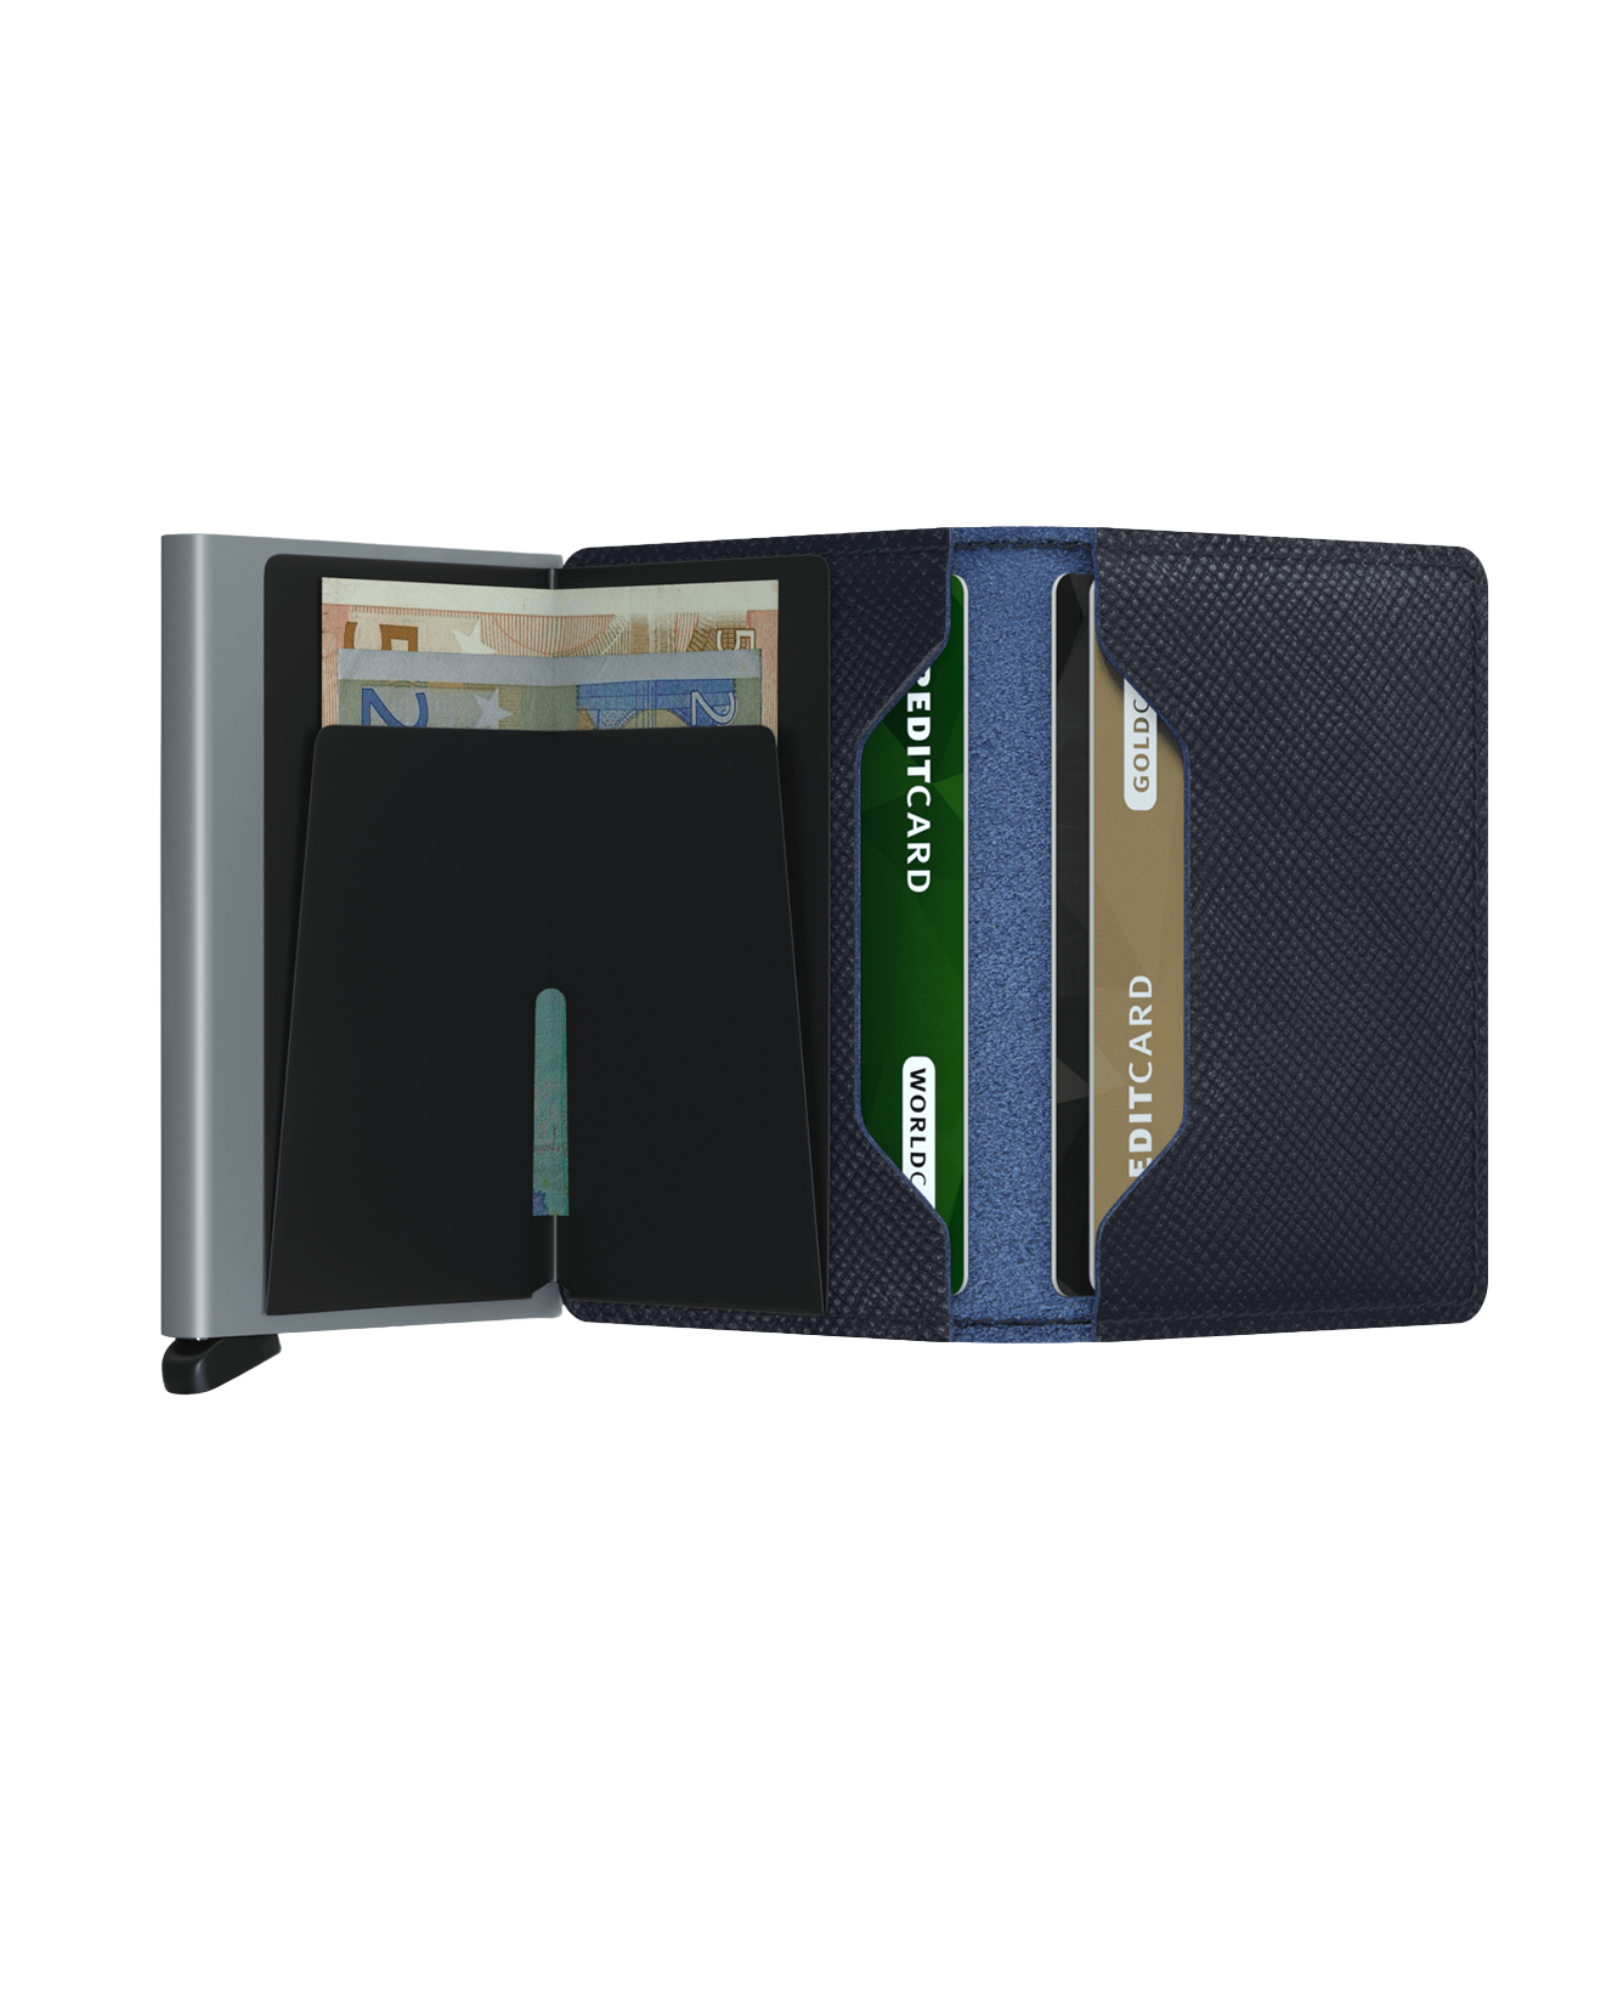 The Slimwallet is a modern take on the classic billfold. With its slim profile it fits perfectly into every pocket. 